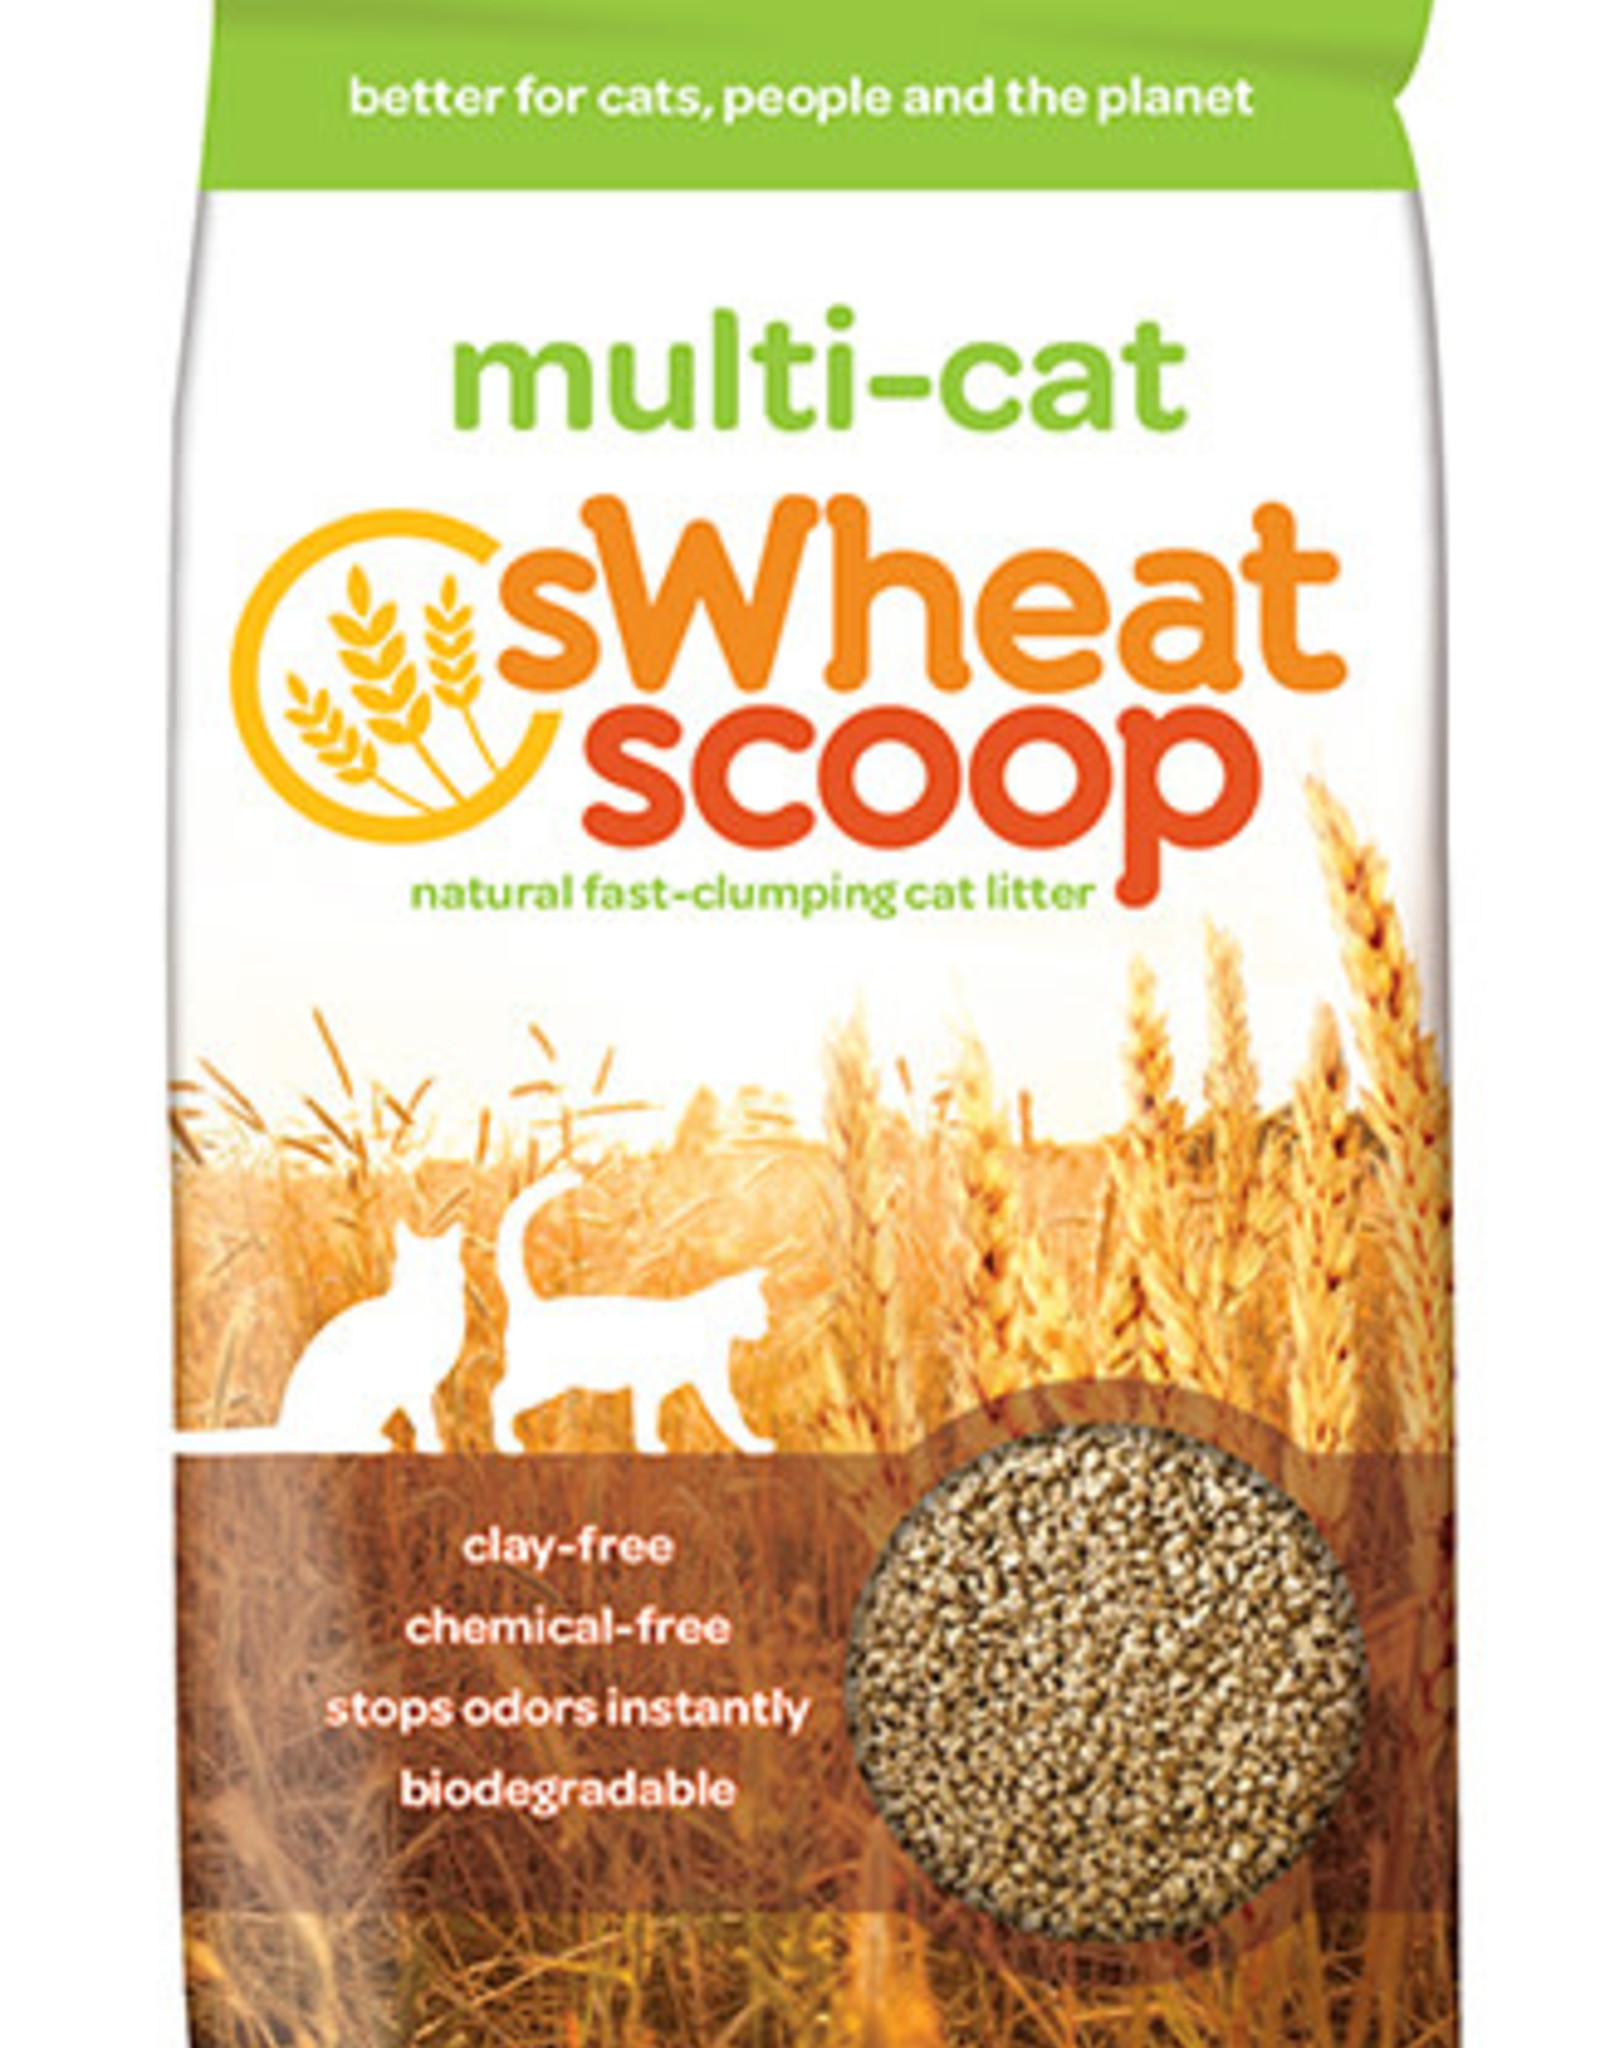 PET CARE SYSTEMS SWHEAT SCOOP MULTI-CAT LITTER 36LBS